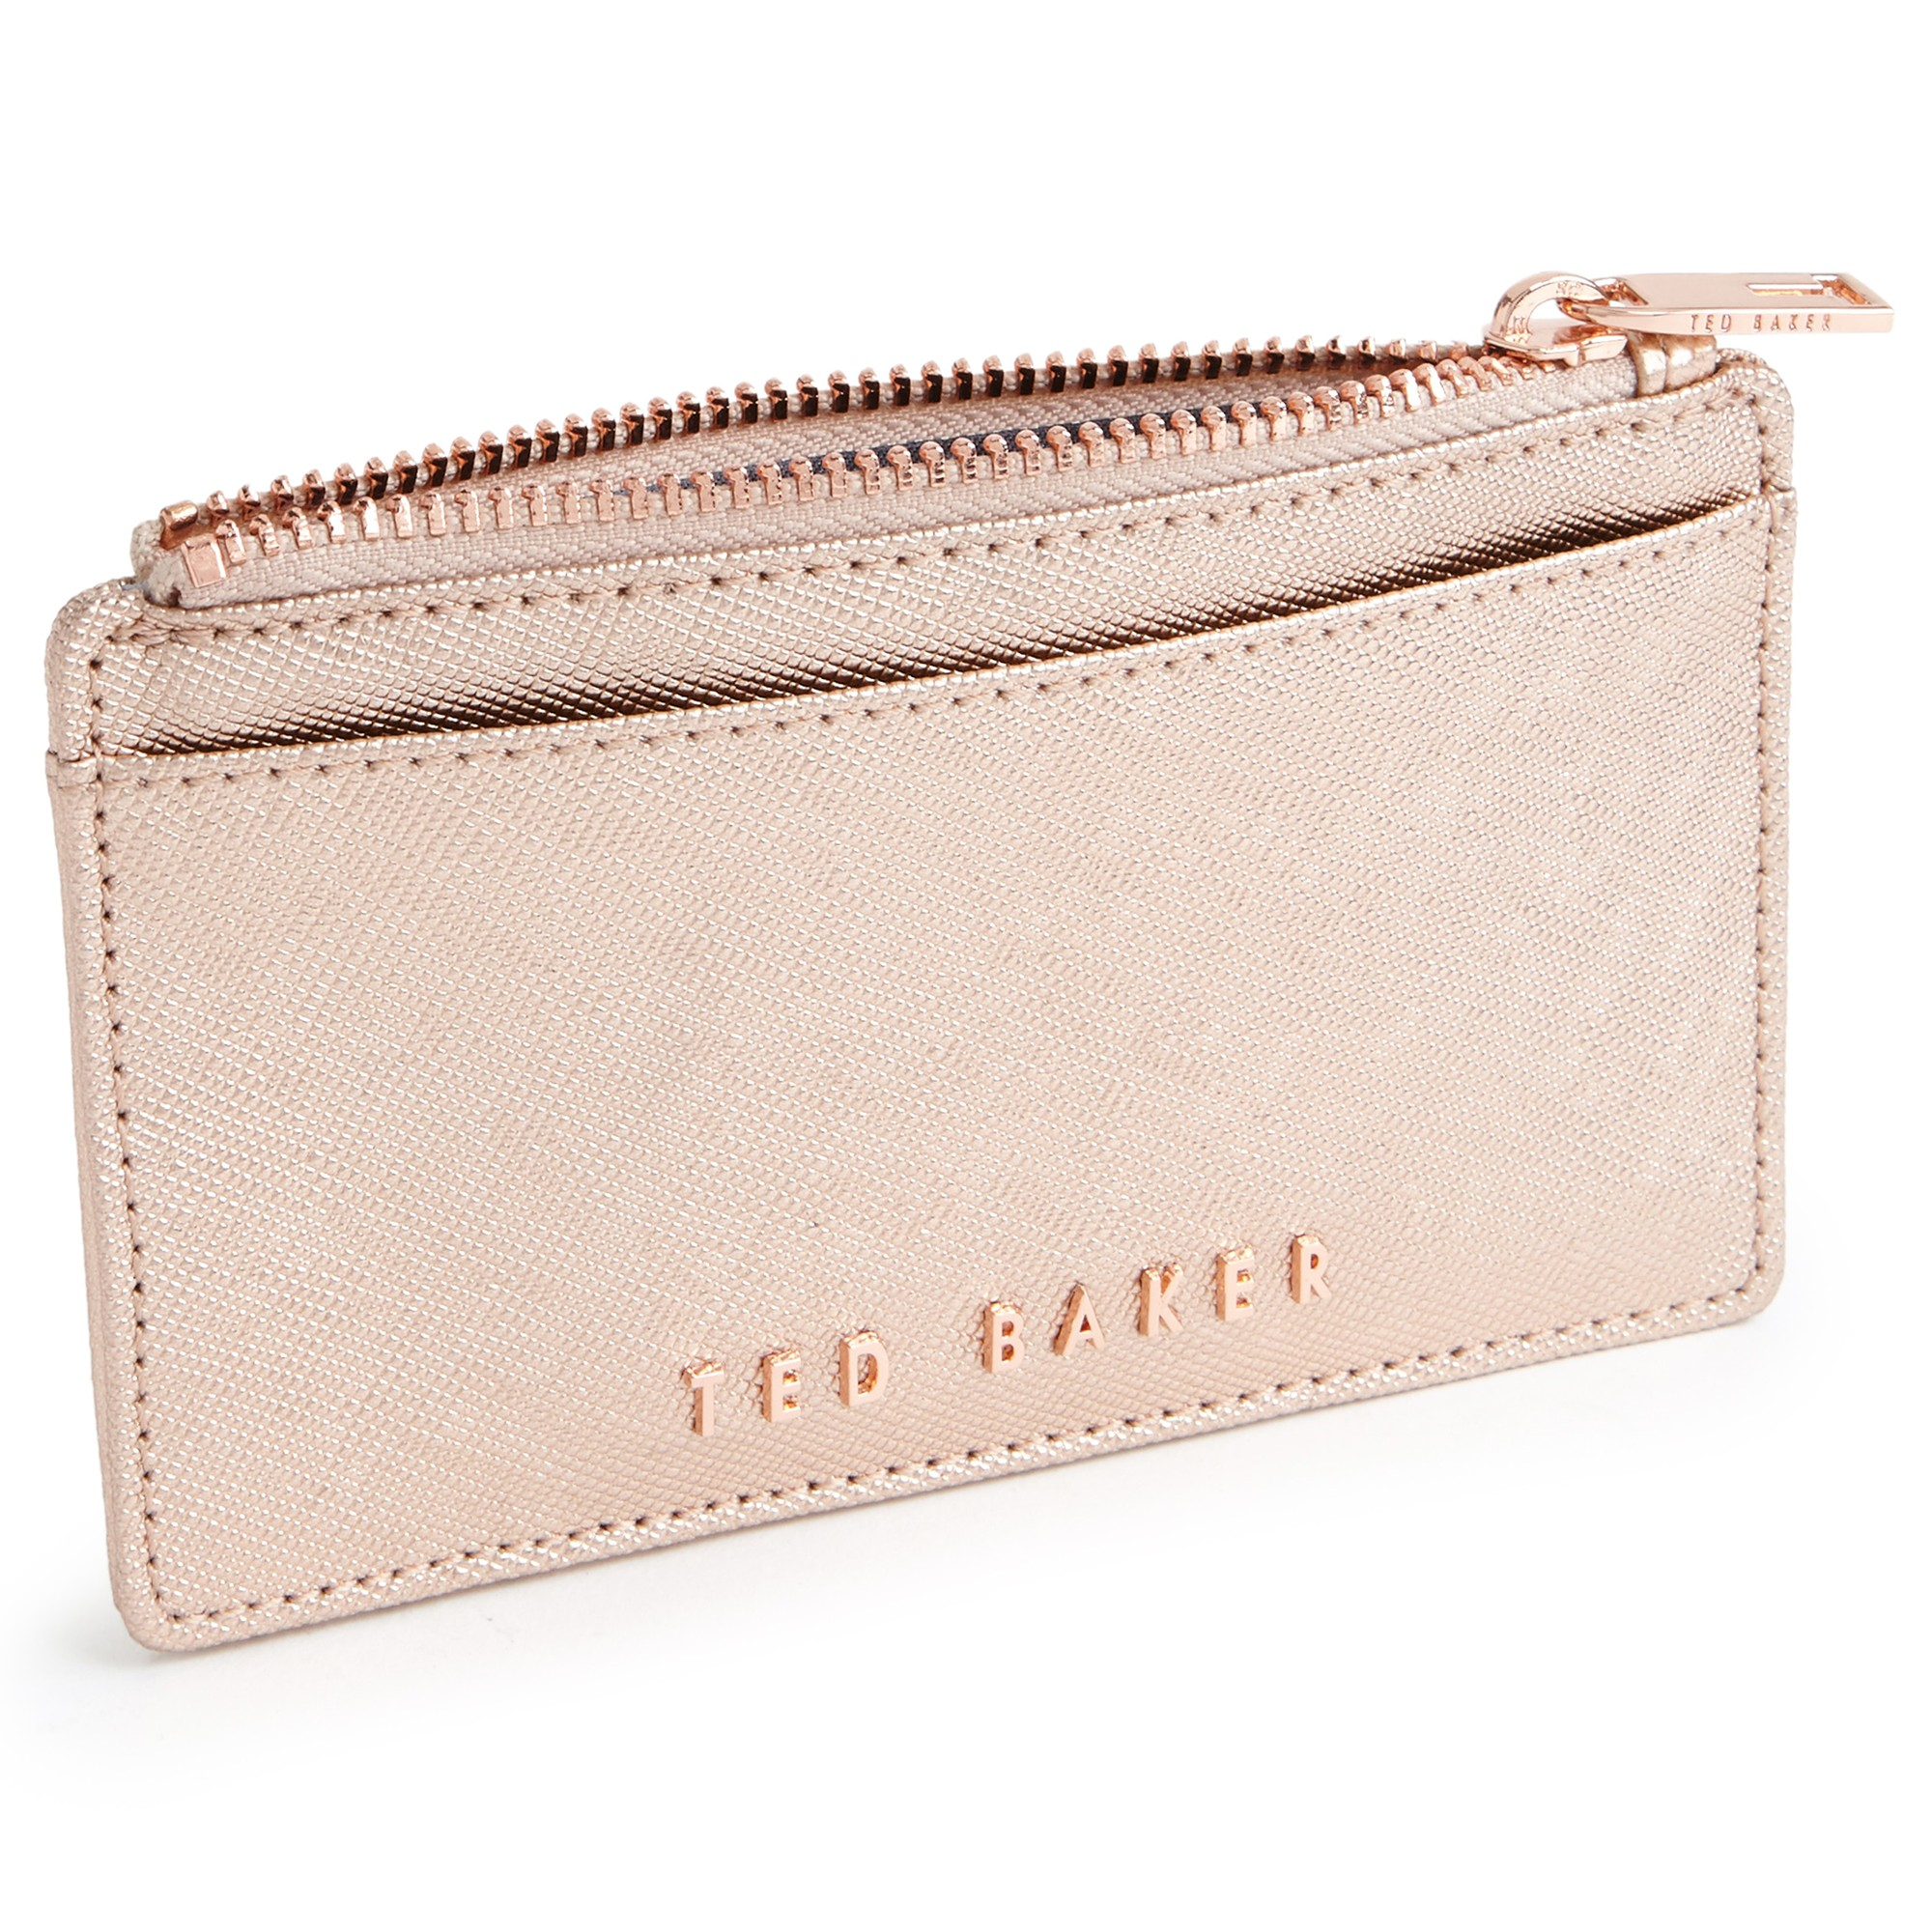 ted-baker-rose-gold-crosshatch-leather-metallic-leather-coin-purse-pink-product-2-090750296-normal.jpeg